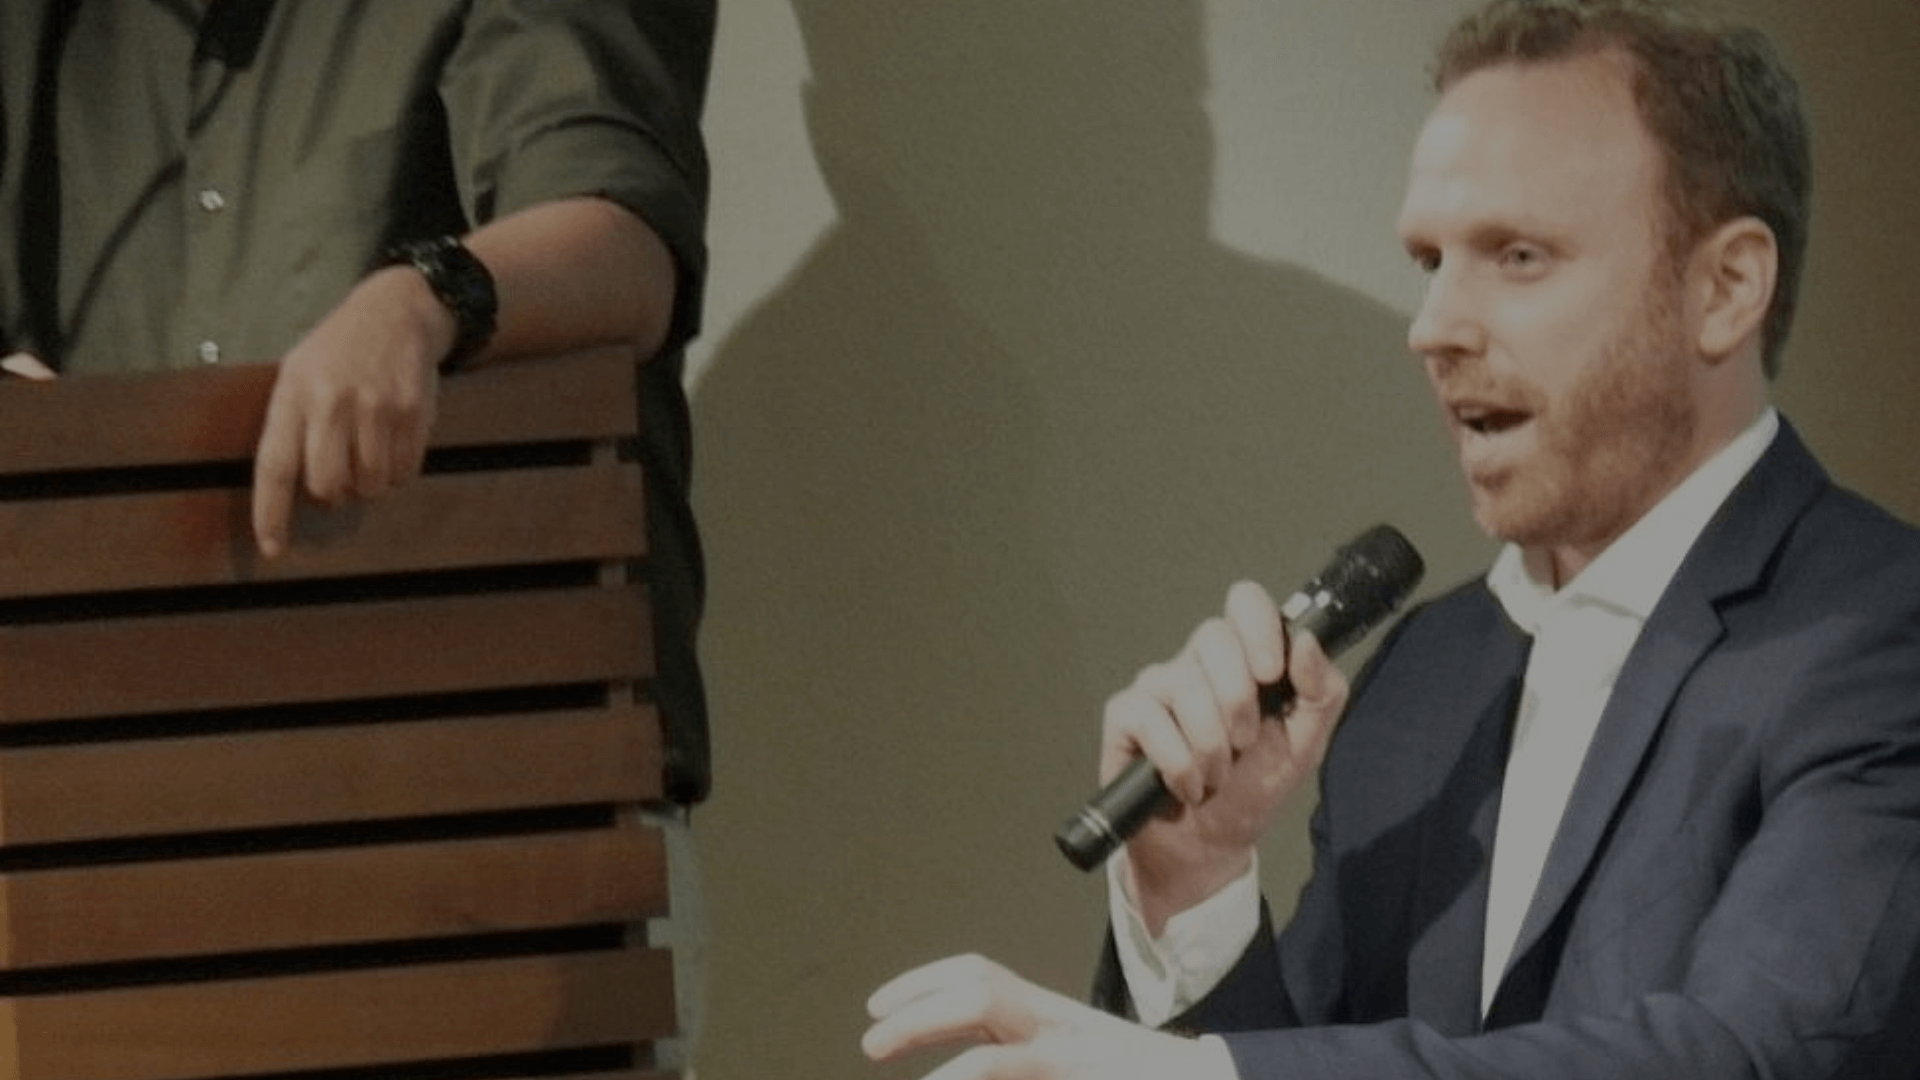 Messing with the Truth: Disinformation in the West Spread by Max Blumenthal